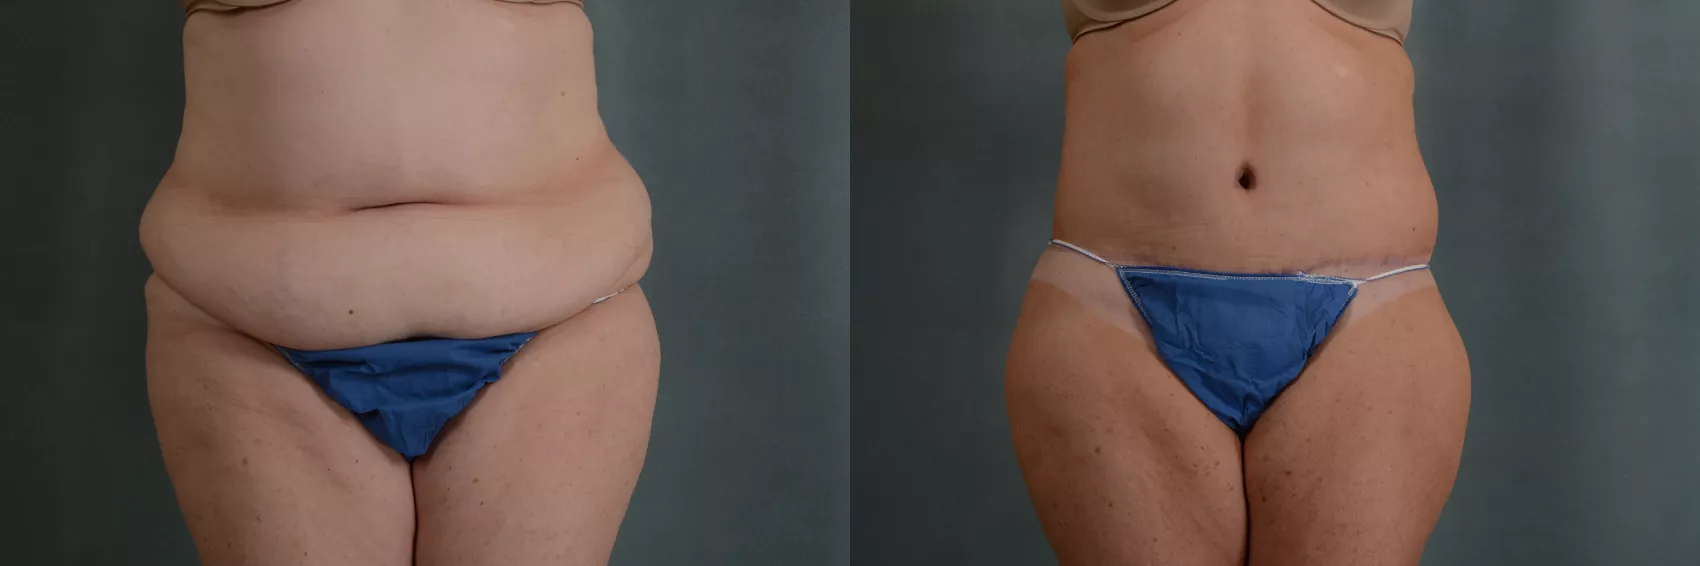 1,823 Abdominoplasty Body Images, Stock Photos, 3D objects